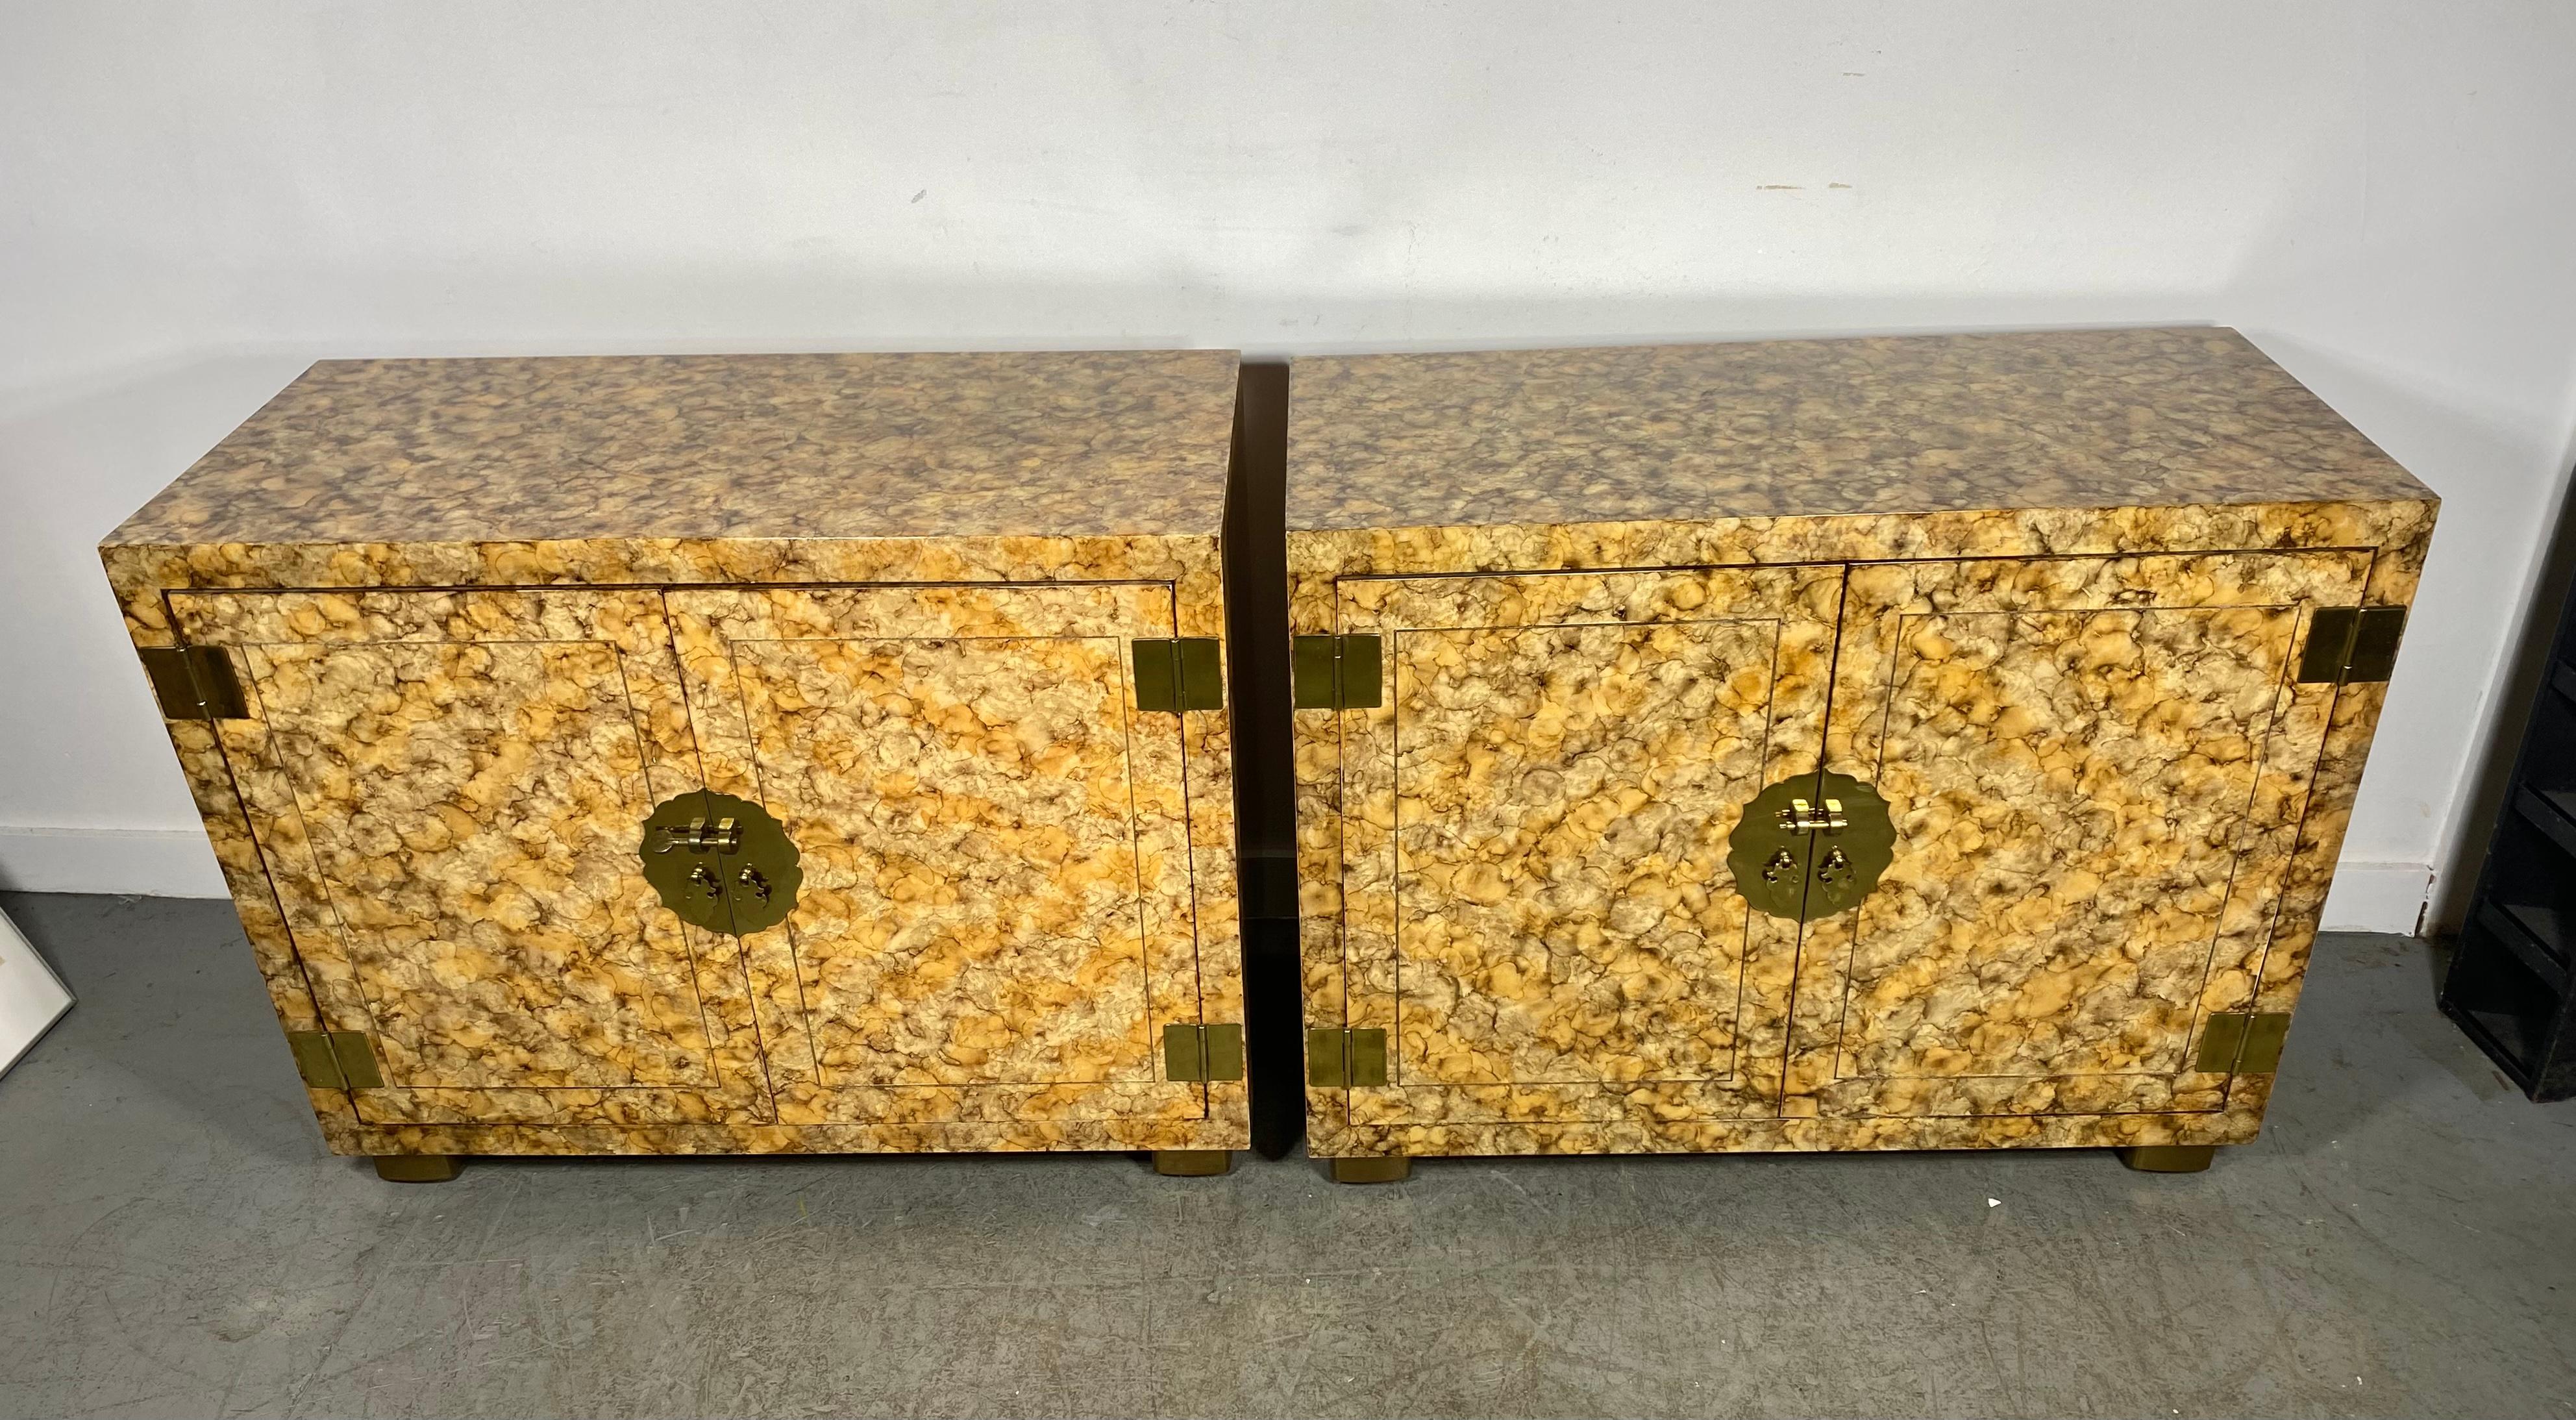 Modernist Matched Pair Asian inspired Faux Tortoise & Brass Cabinets made by Henredon Fine Furniture.. , Wonderful original finish ,patina.. featuring two doors with asian inspired brass hardware as well as stunning brass flat hinge detail and brass